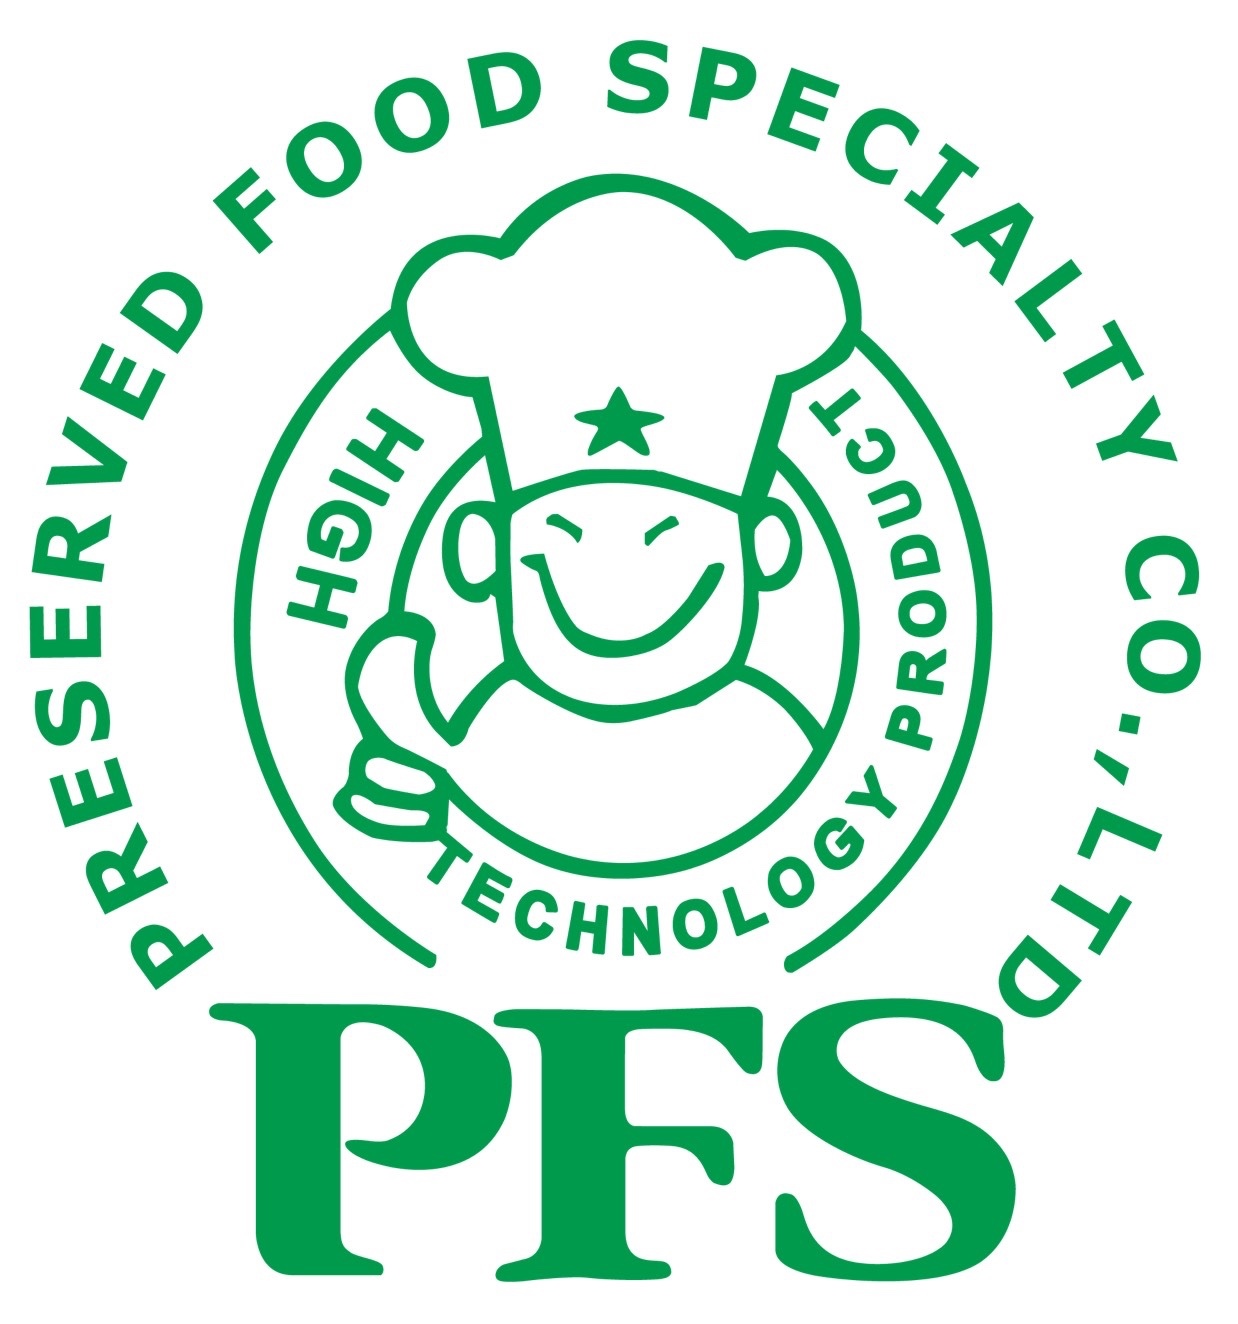 Preserved Food Specialty Co., Ltd.